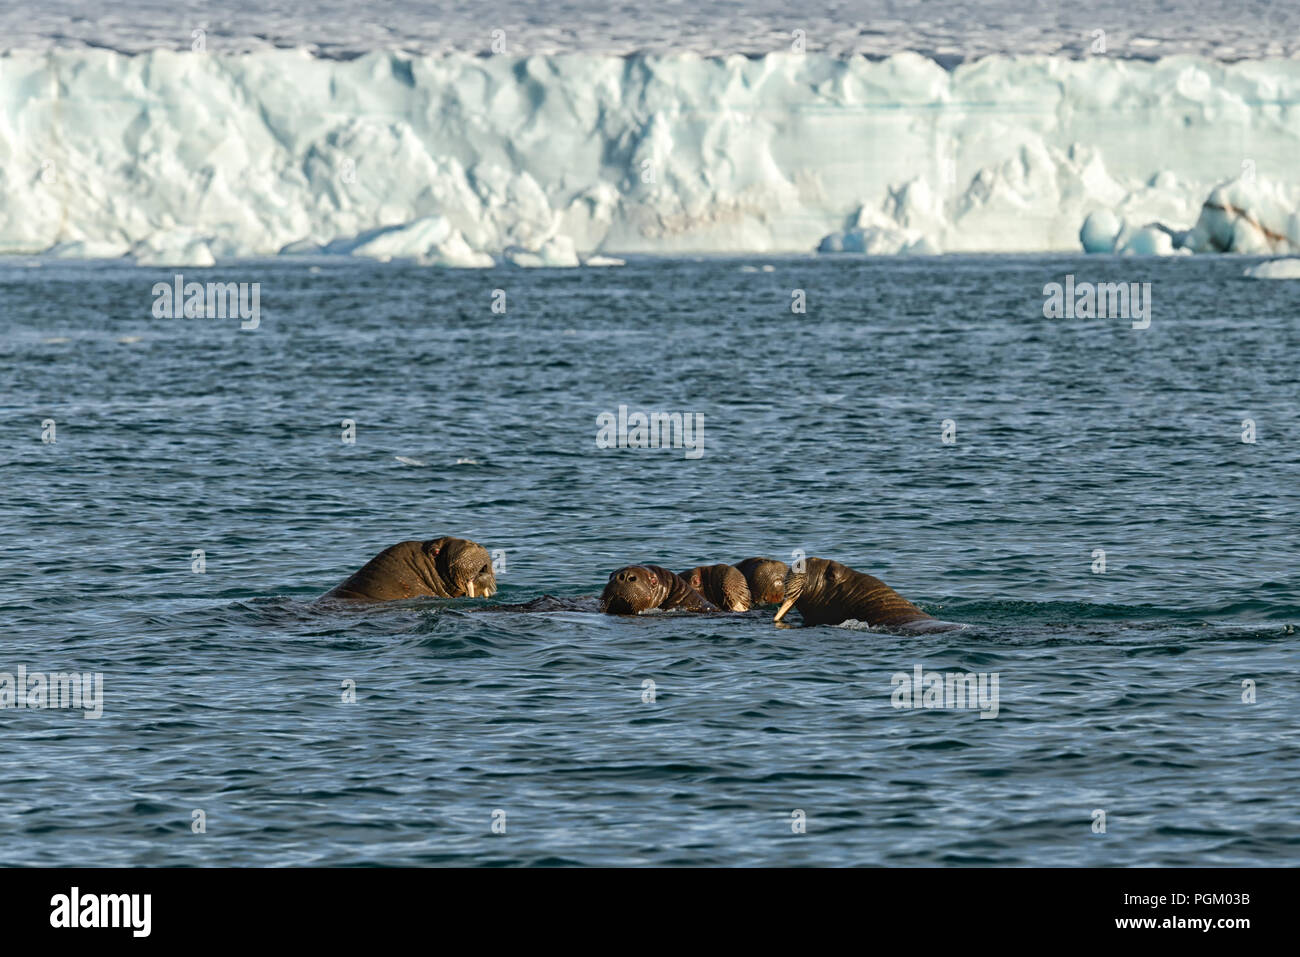 Group of walruses swimming in sea in front of the glacier Bråsvellbreen, arctic ice cap Austfonna , Nordaustlandet, Svalbard Archipelago, Norway Stock Photo